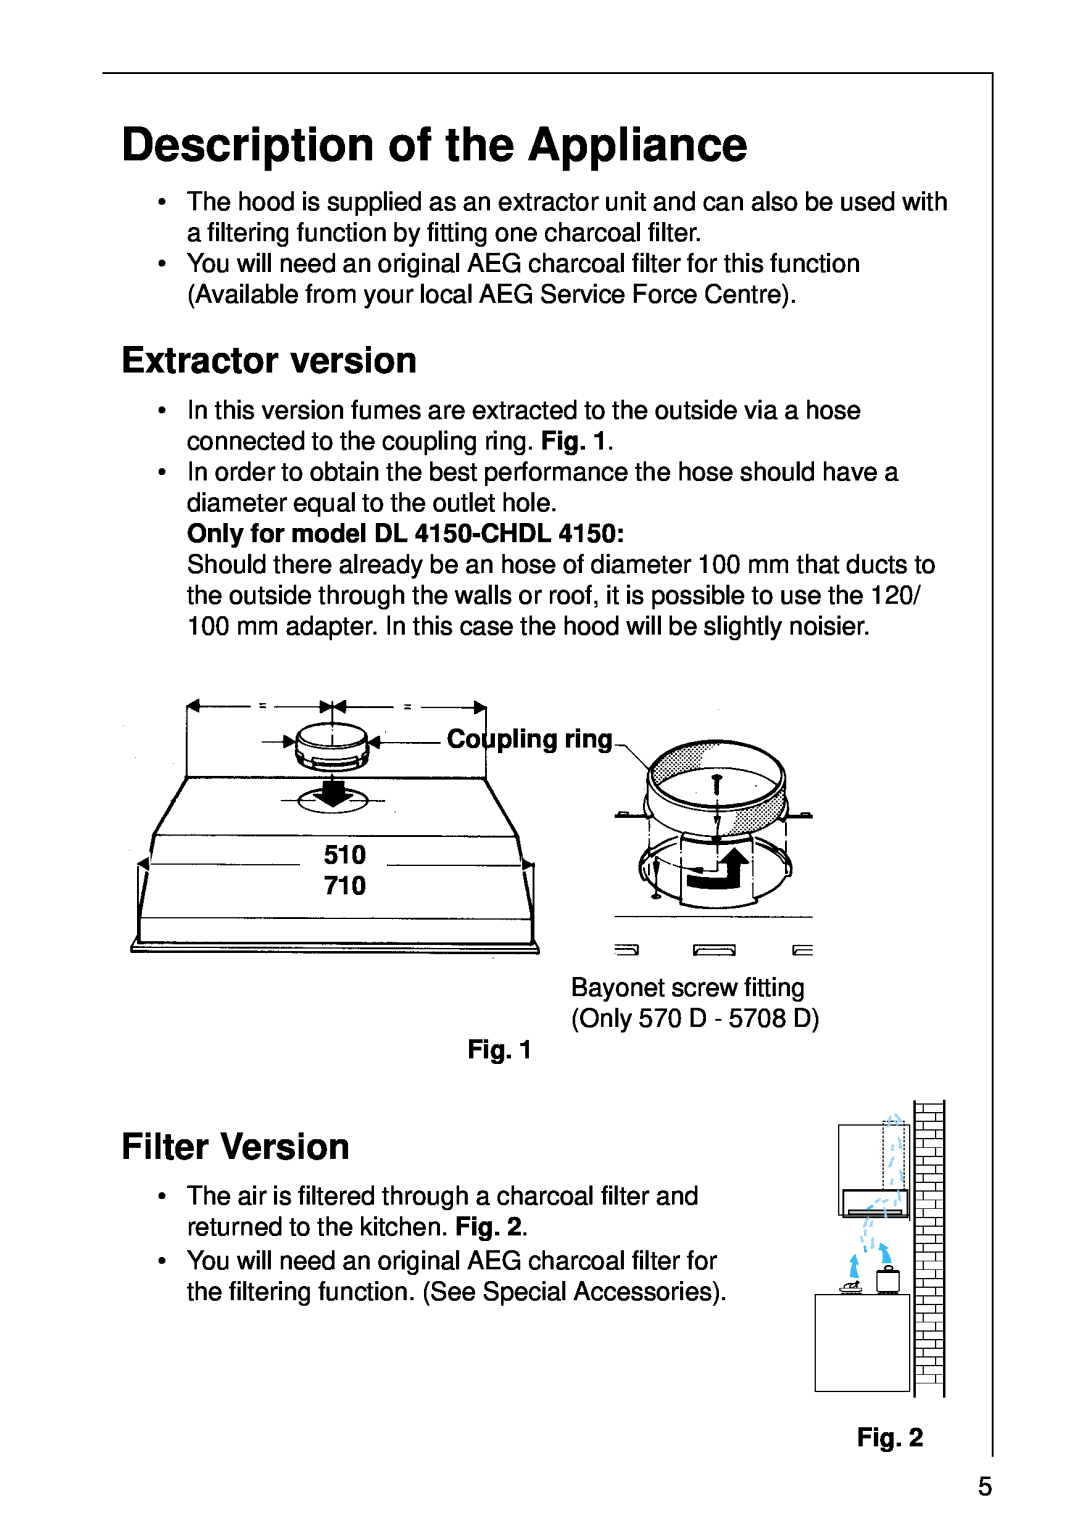 Electrolux 5708 D, 570 D Description of the Appliance, Extractor version, Filter Version, Only for model DL 4150-CHDL 